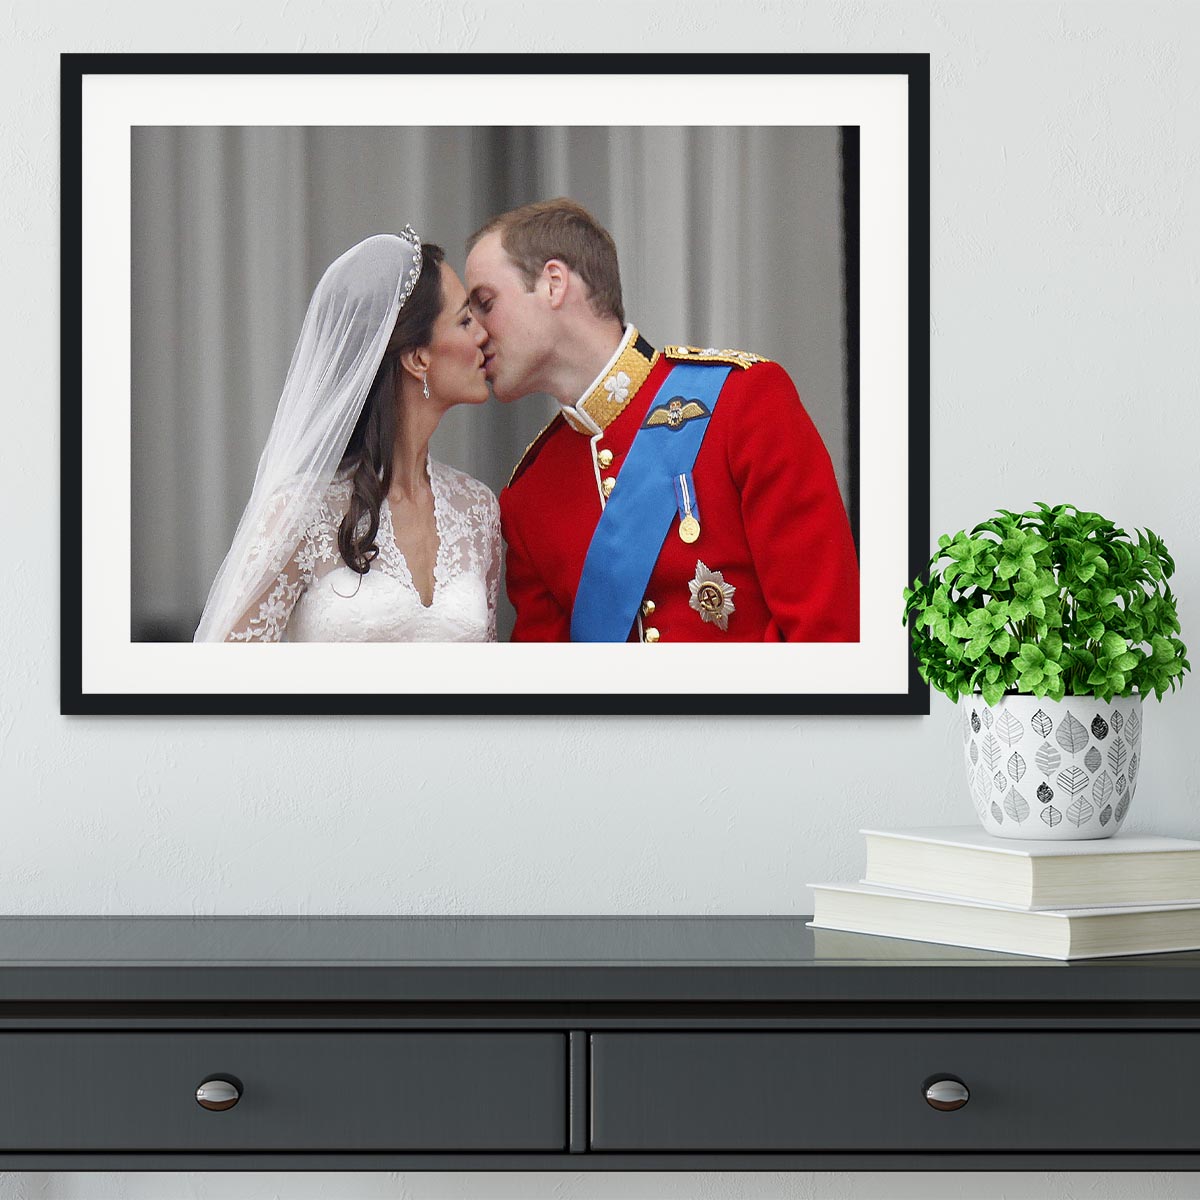 Prince William and Kate sharing a wedding kiss Framed Print - Canvas Art Rocks - 1